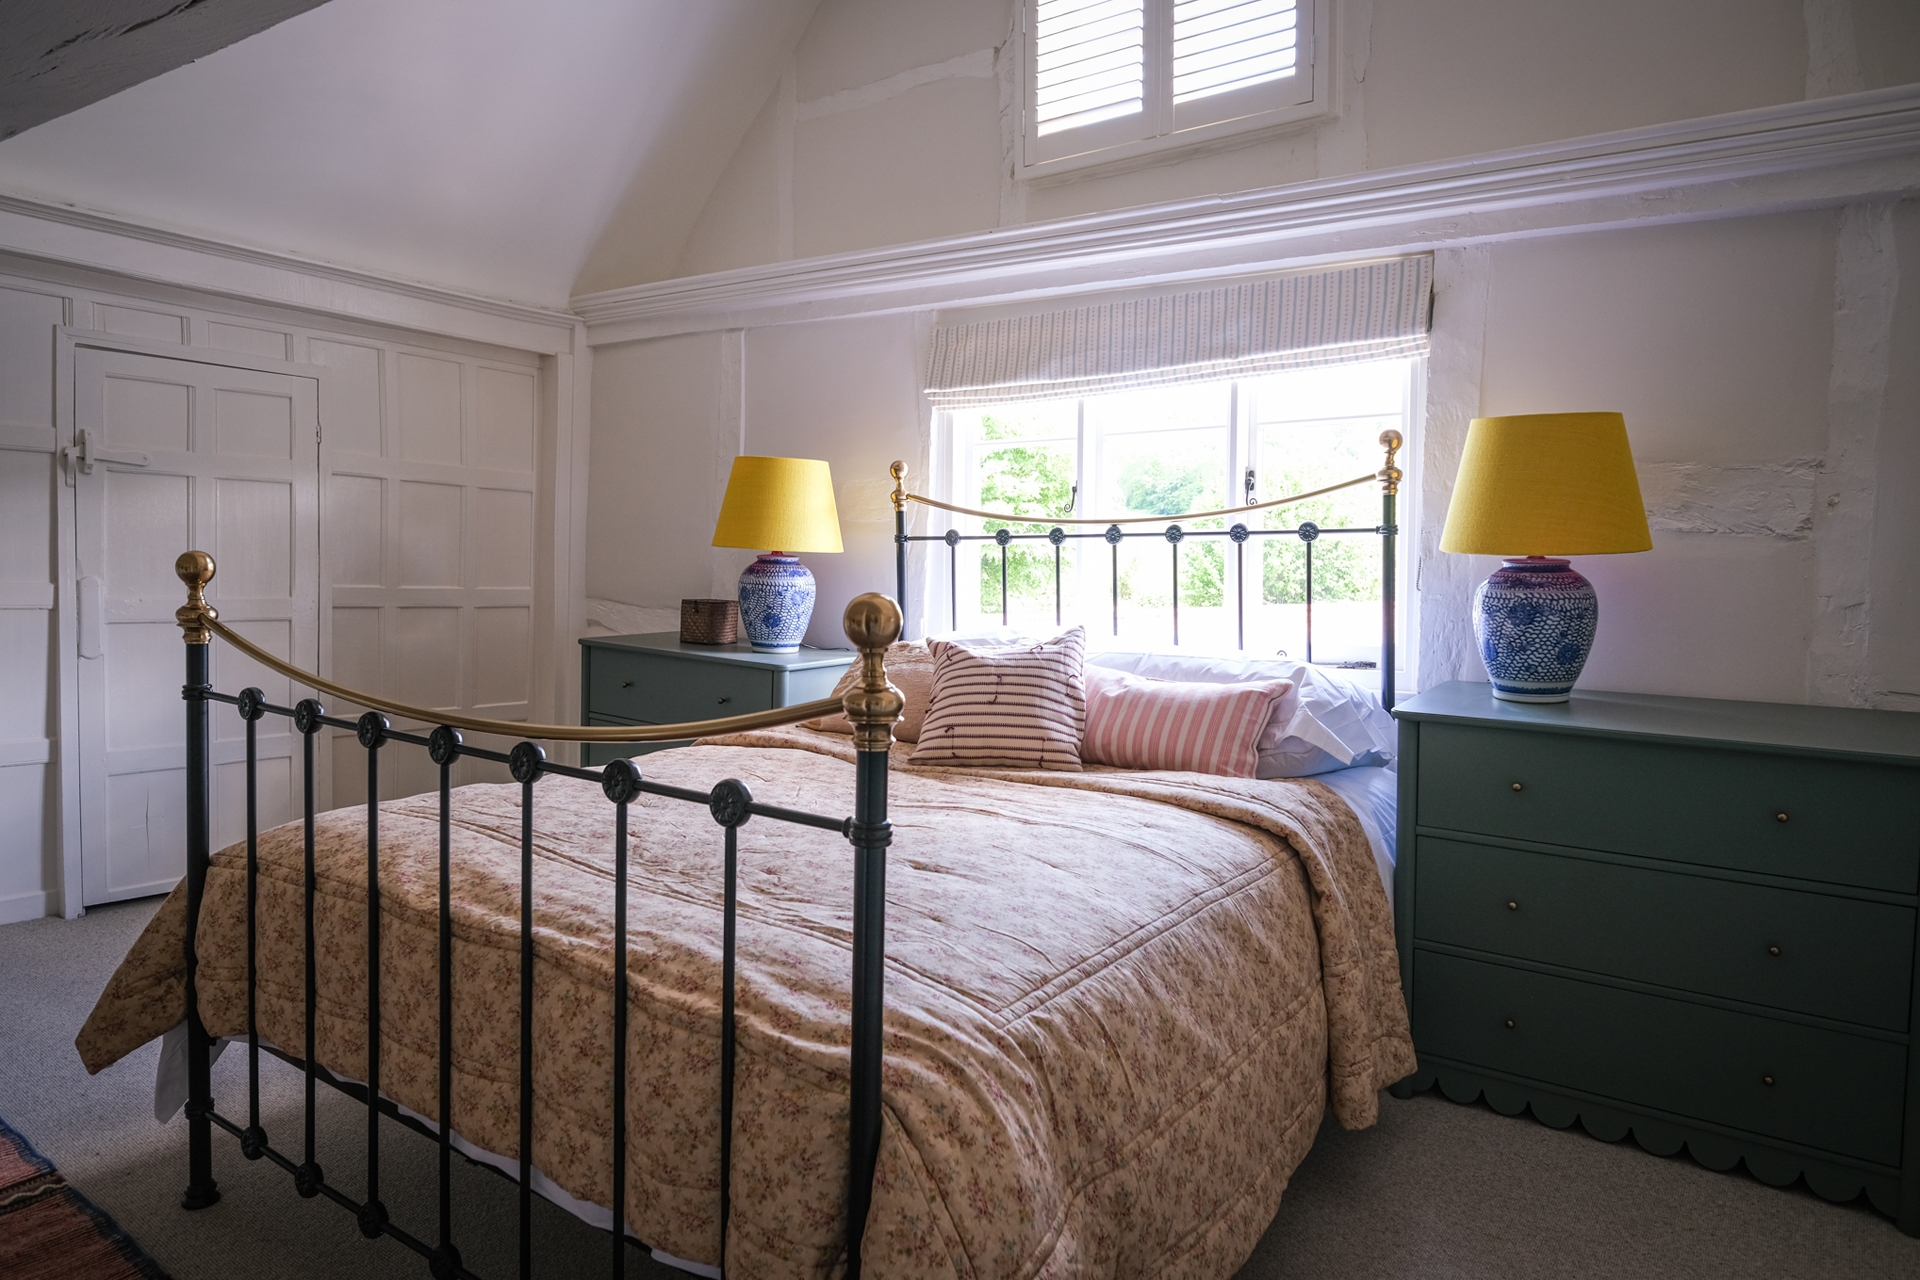 Bed at Challens Yarde, a cottage in Sussex